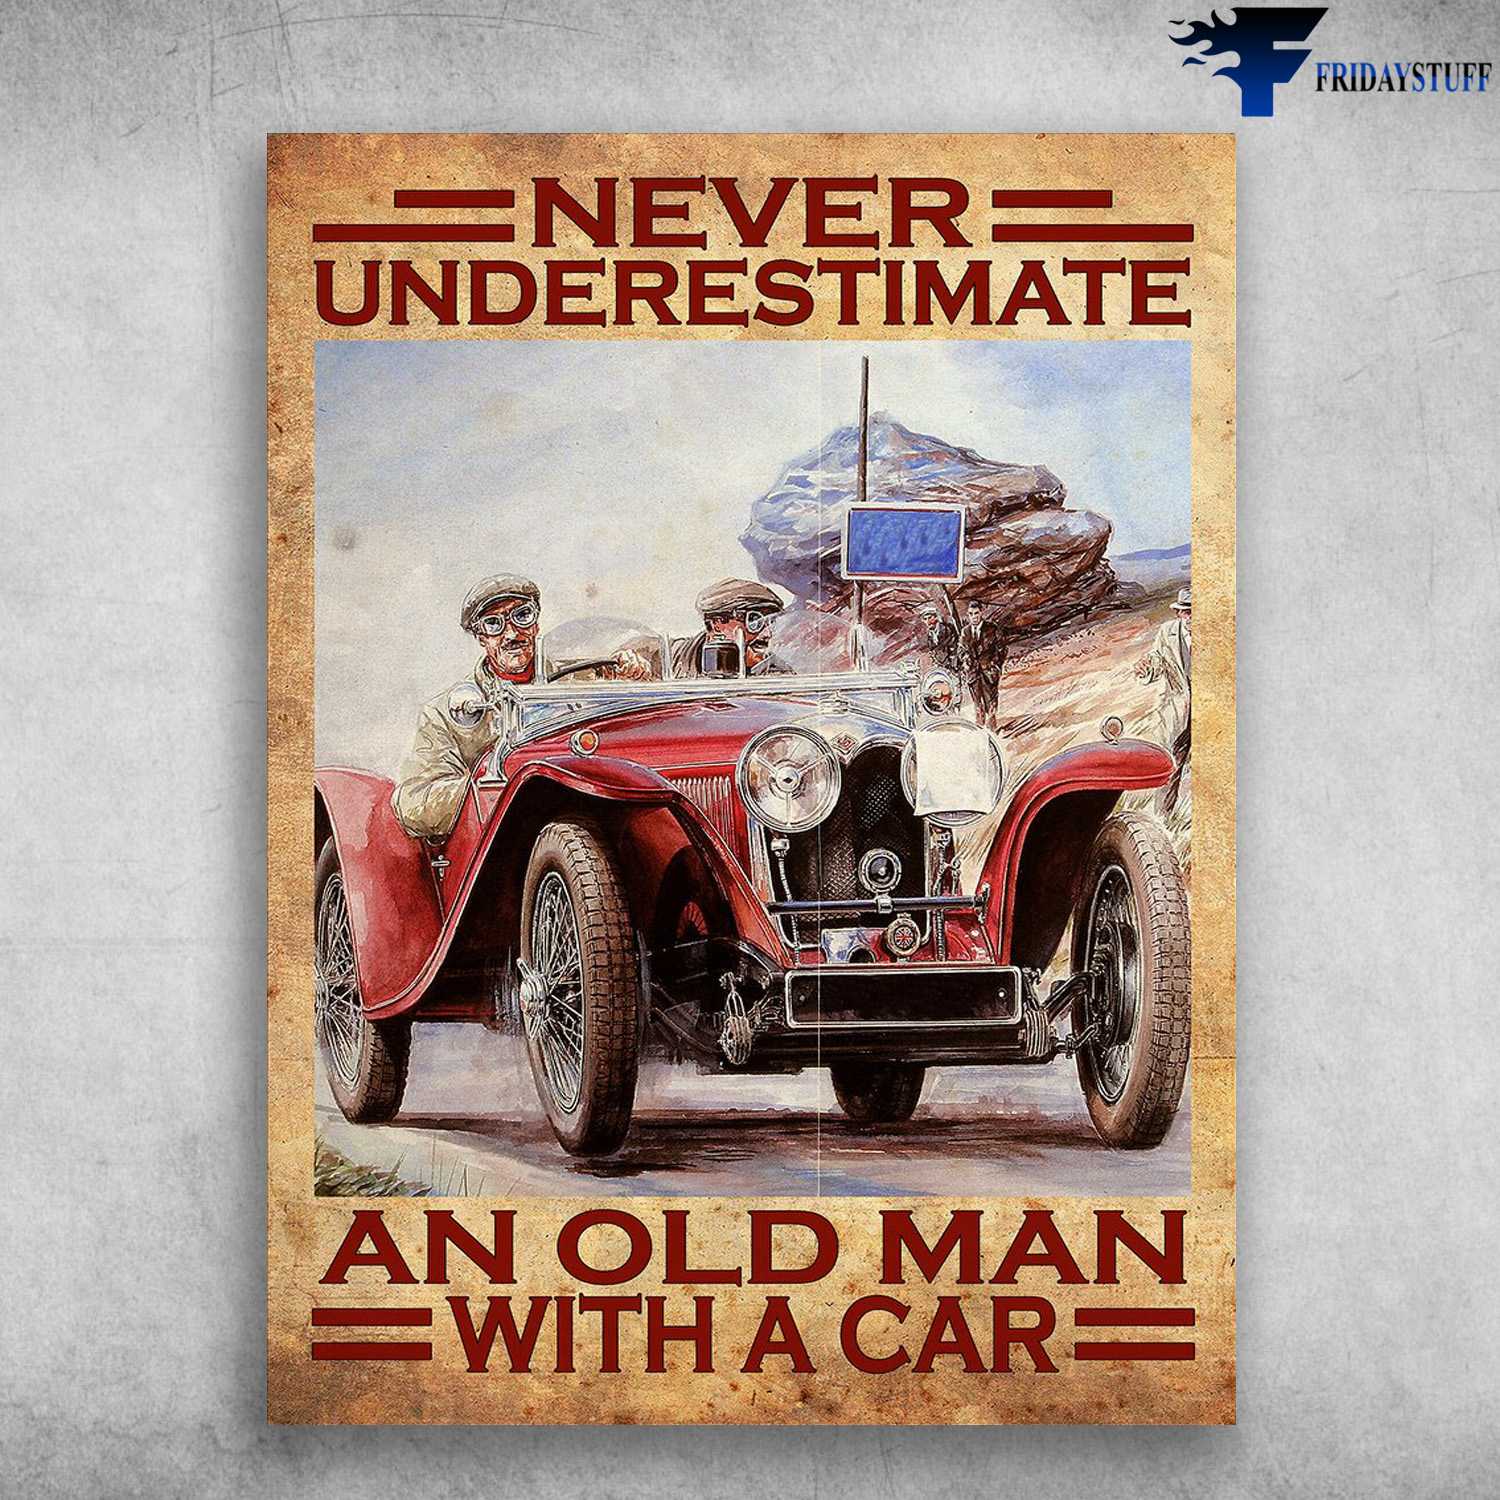 Old Man Loves Car, Car Lover - Never Underestimate, An Old Man, With A Car